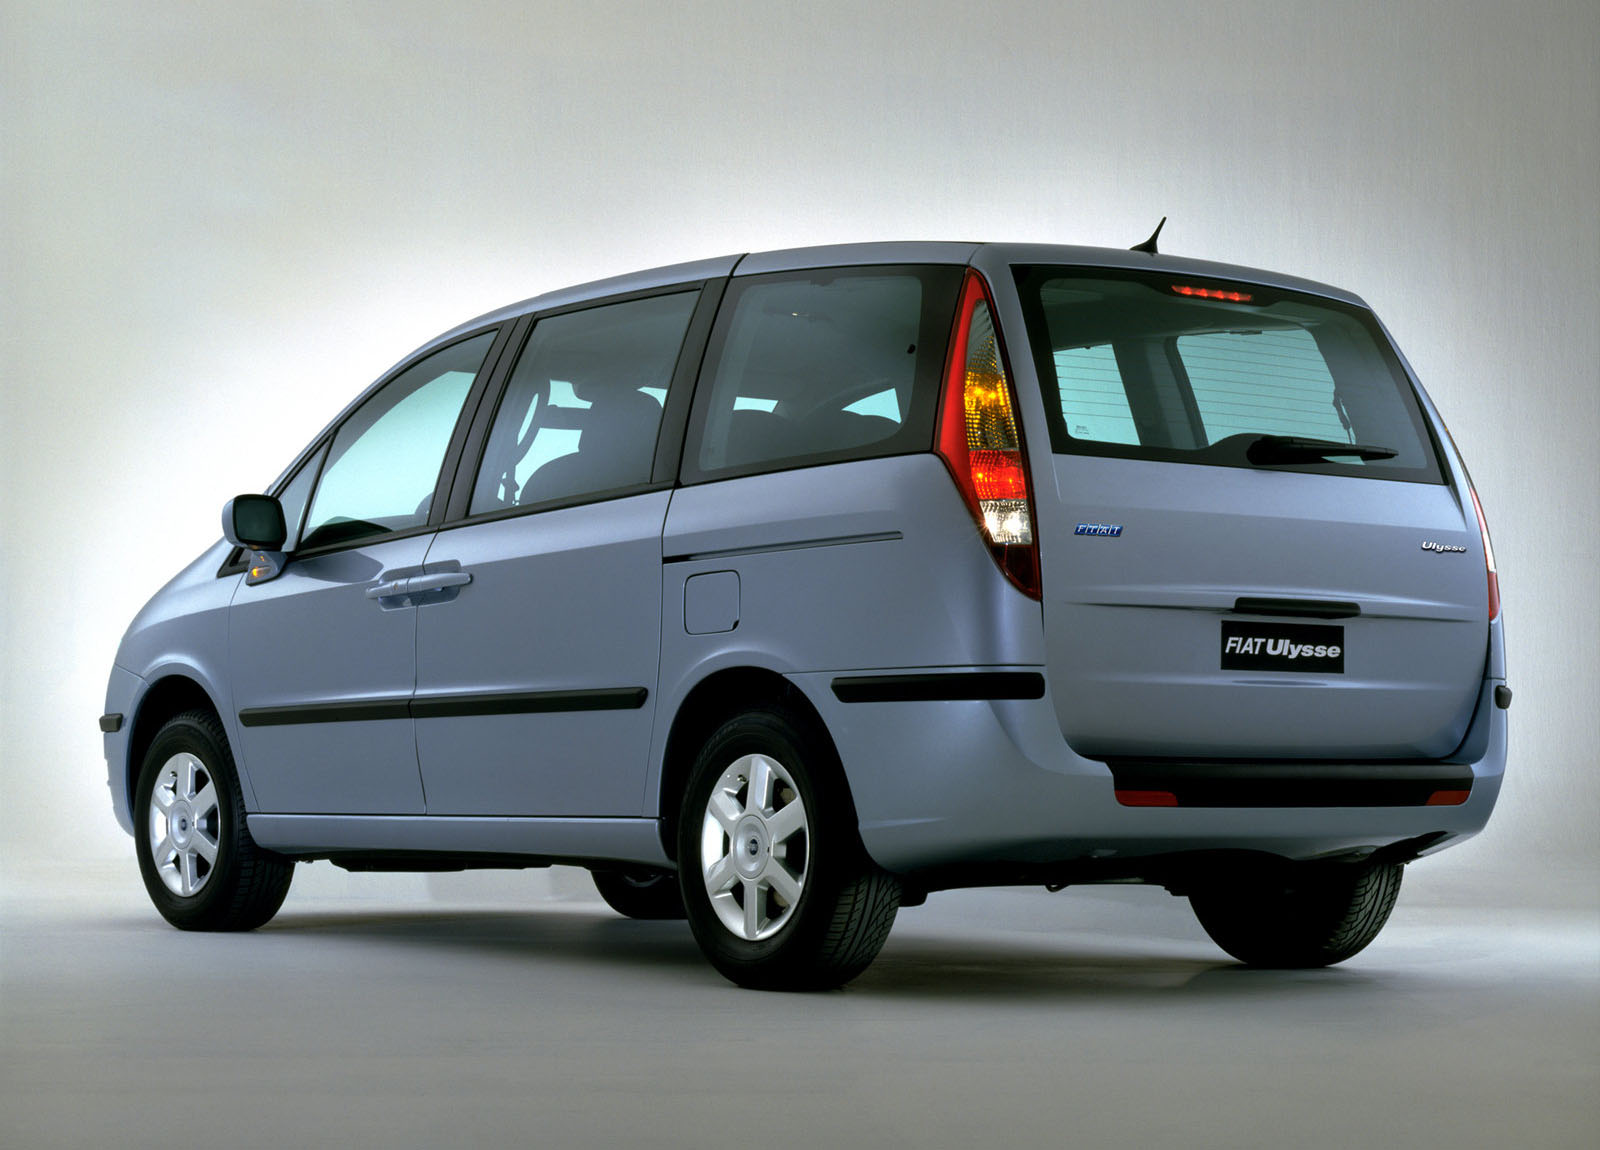 2002 Fiat Ulysse HD Pictures